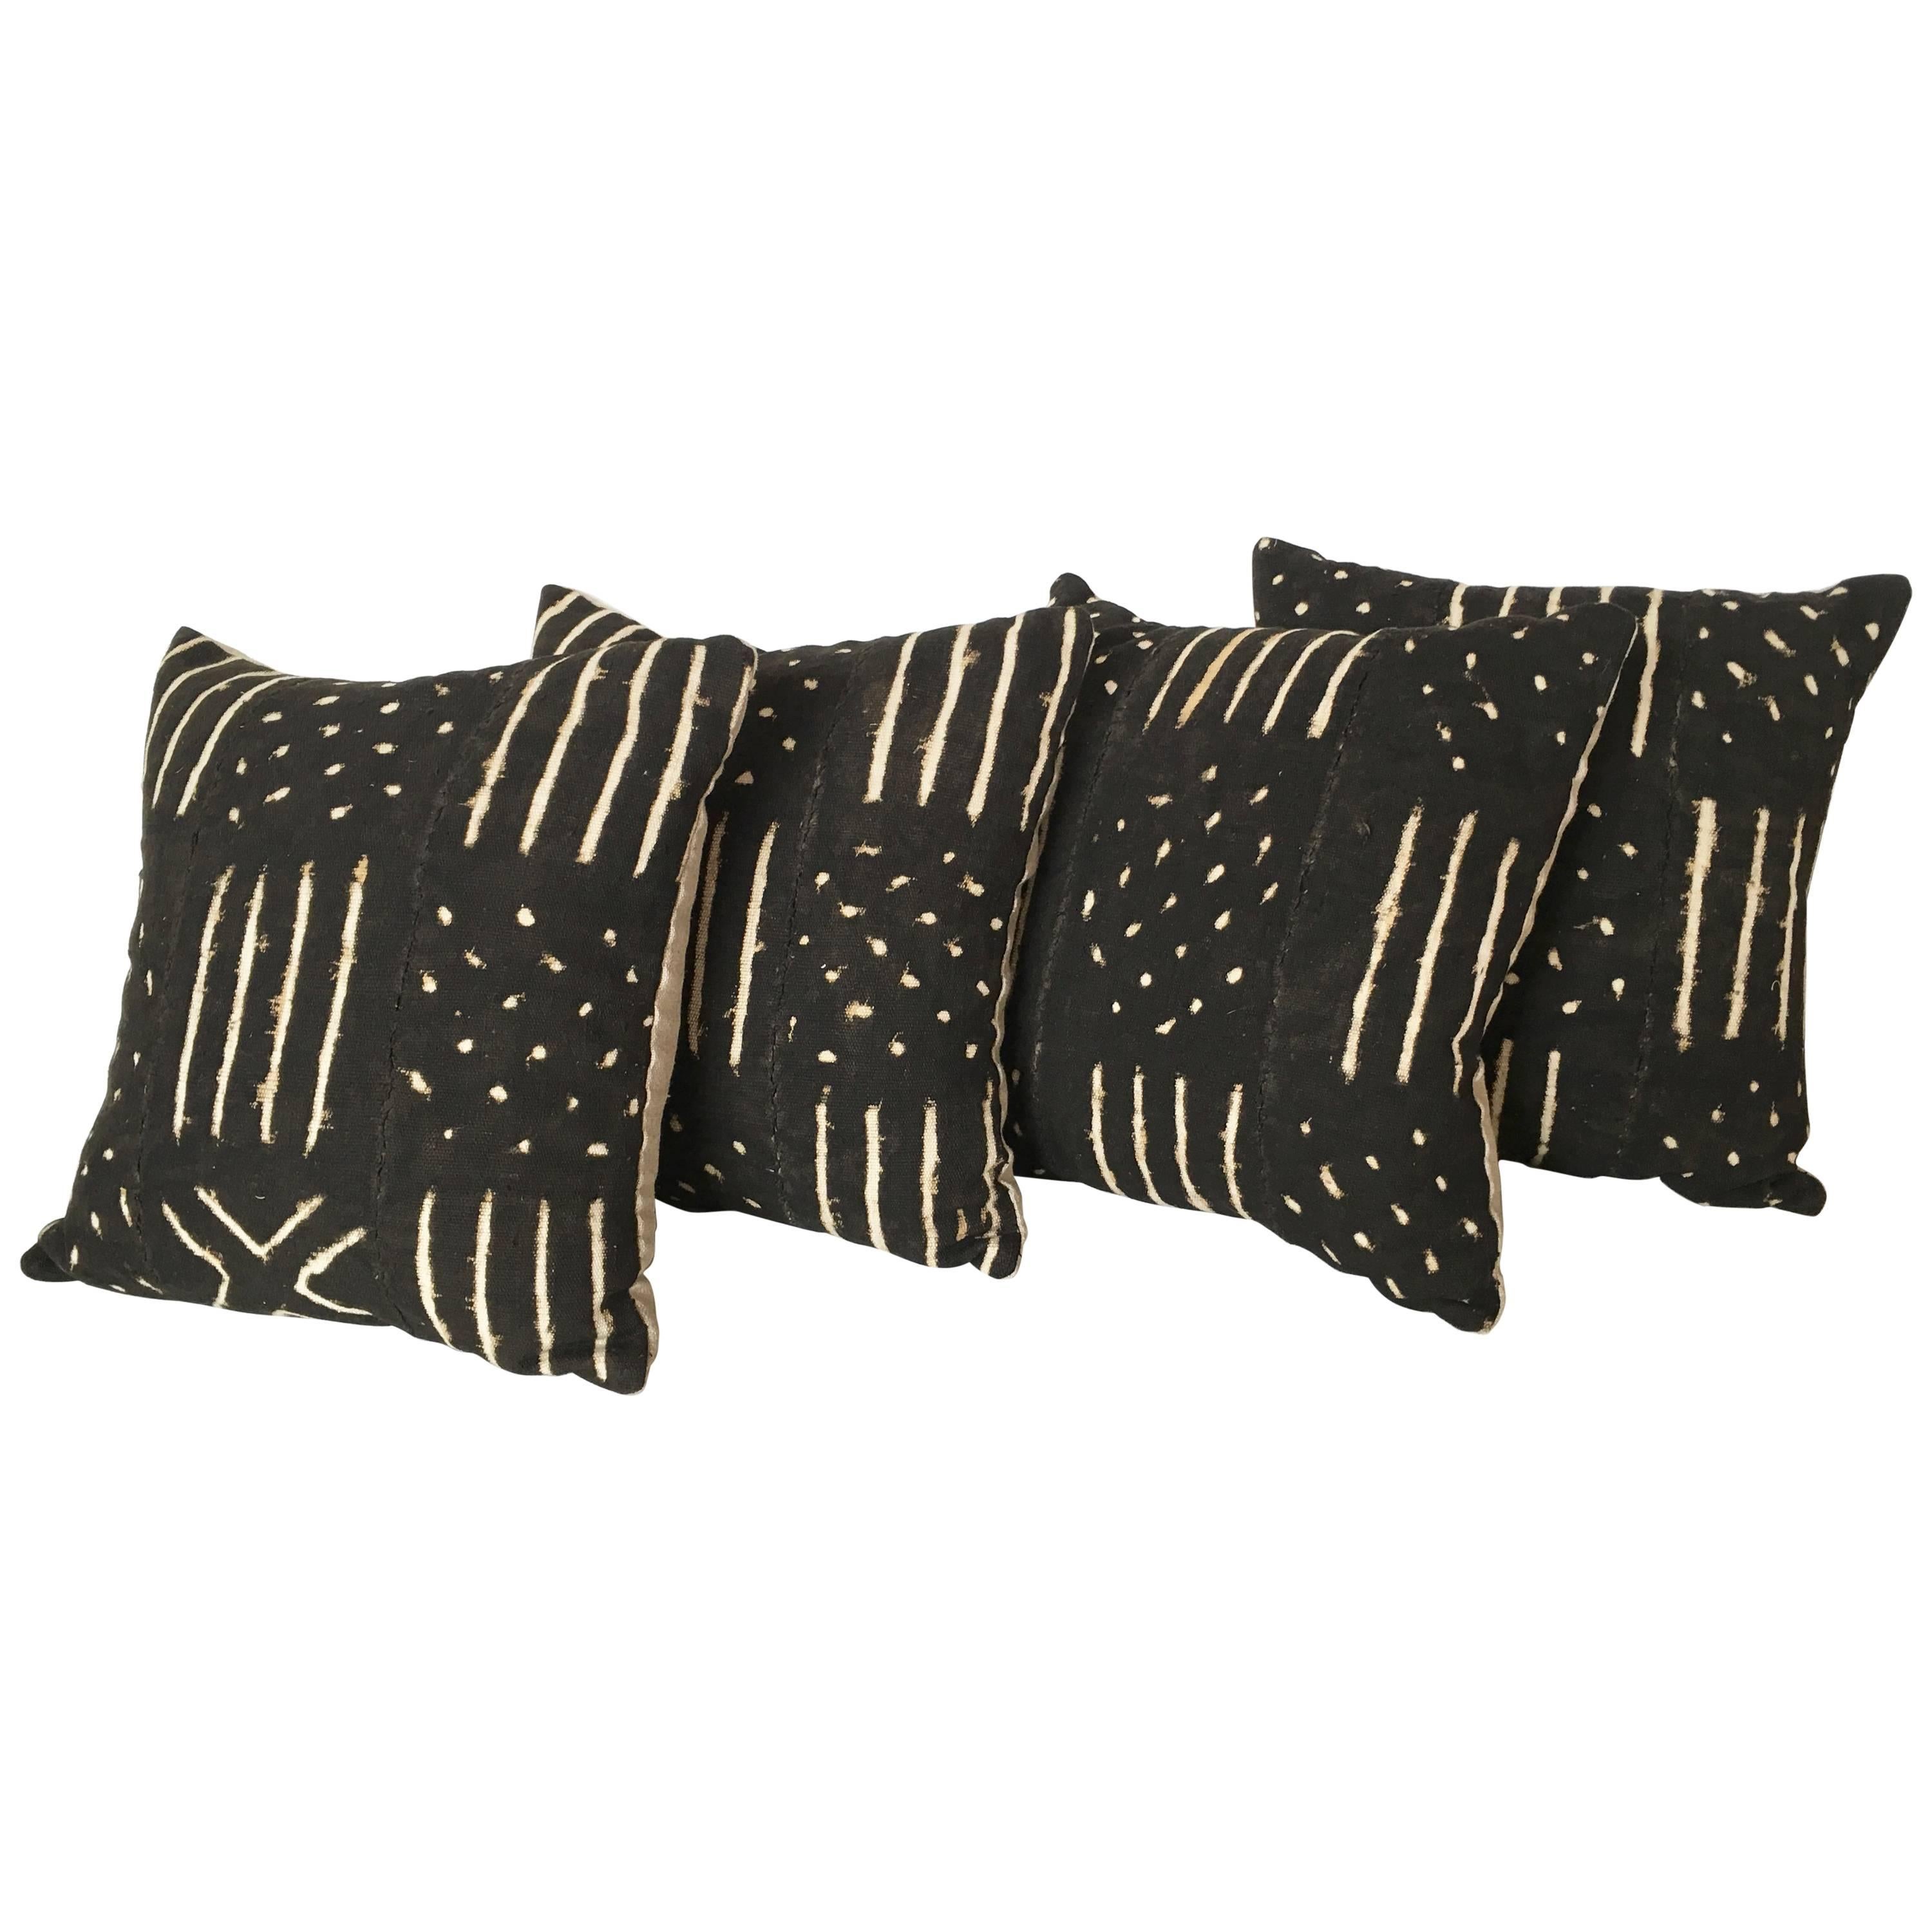 Handmade Black and White Graphic African Mud Cloth Pillows